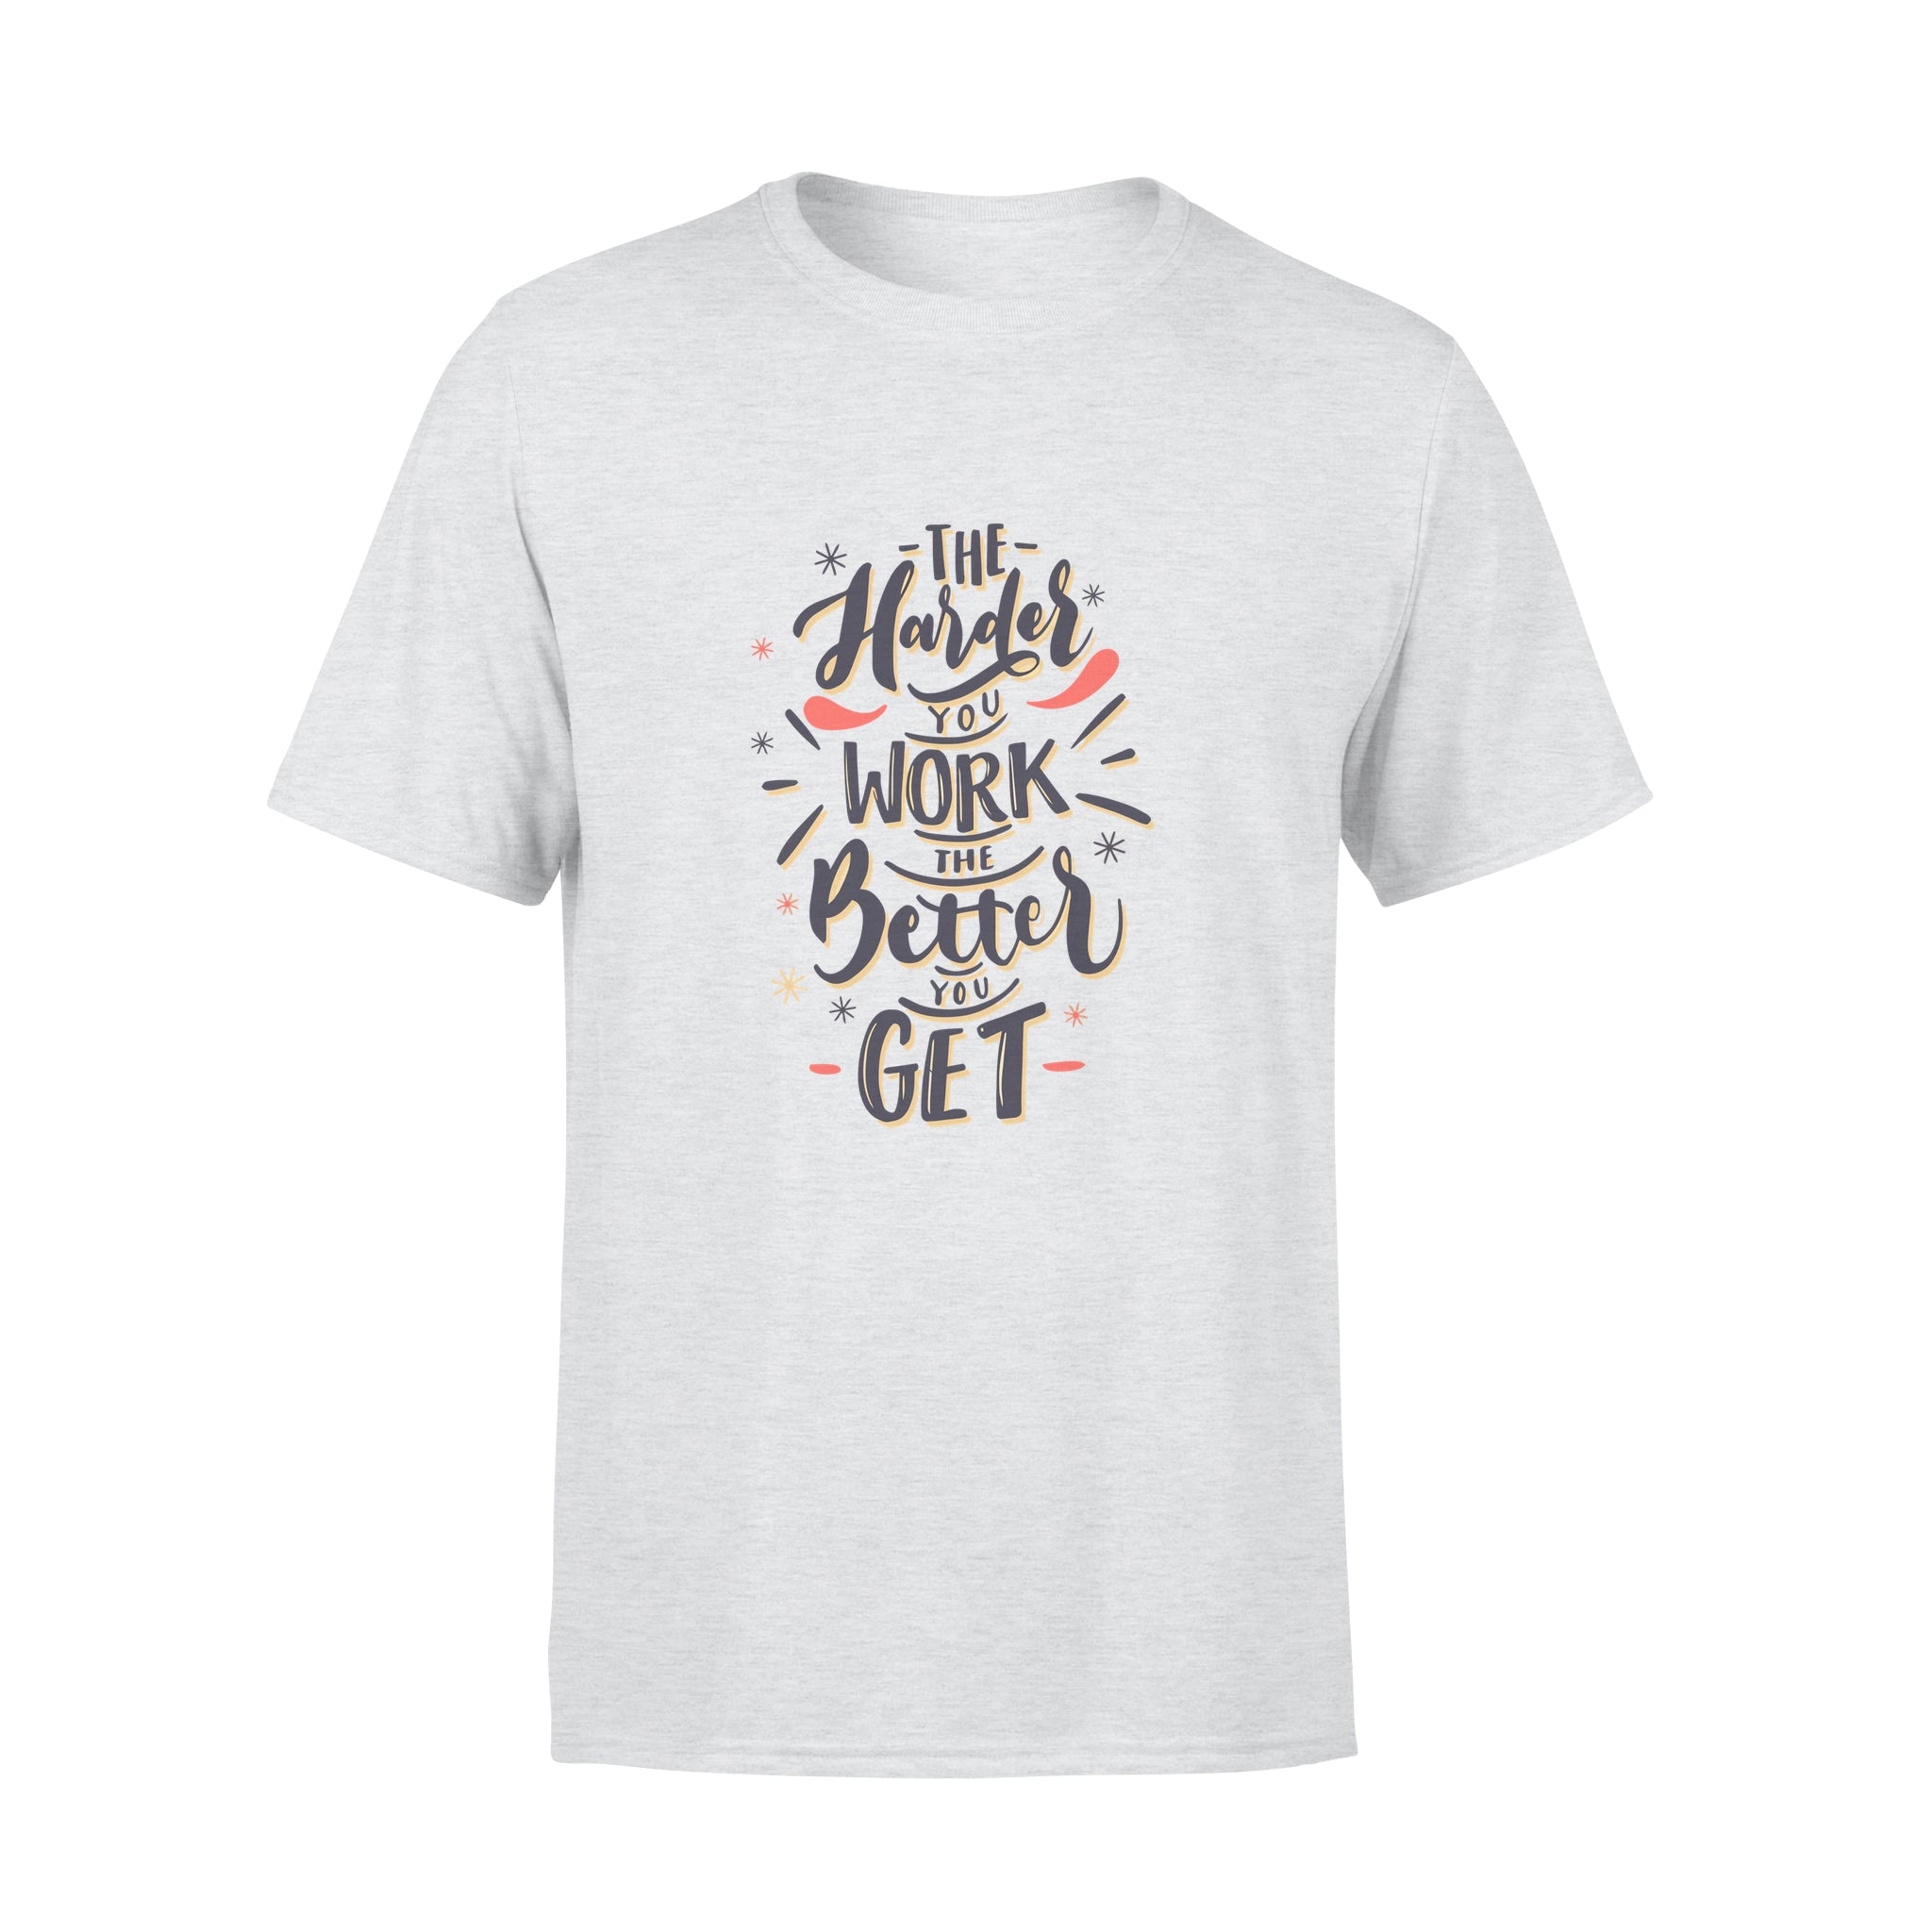 The Harder You Work The Better You Get - T-shirt